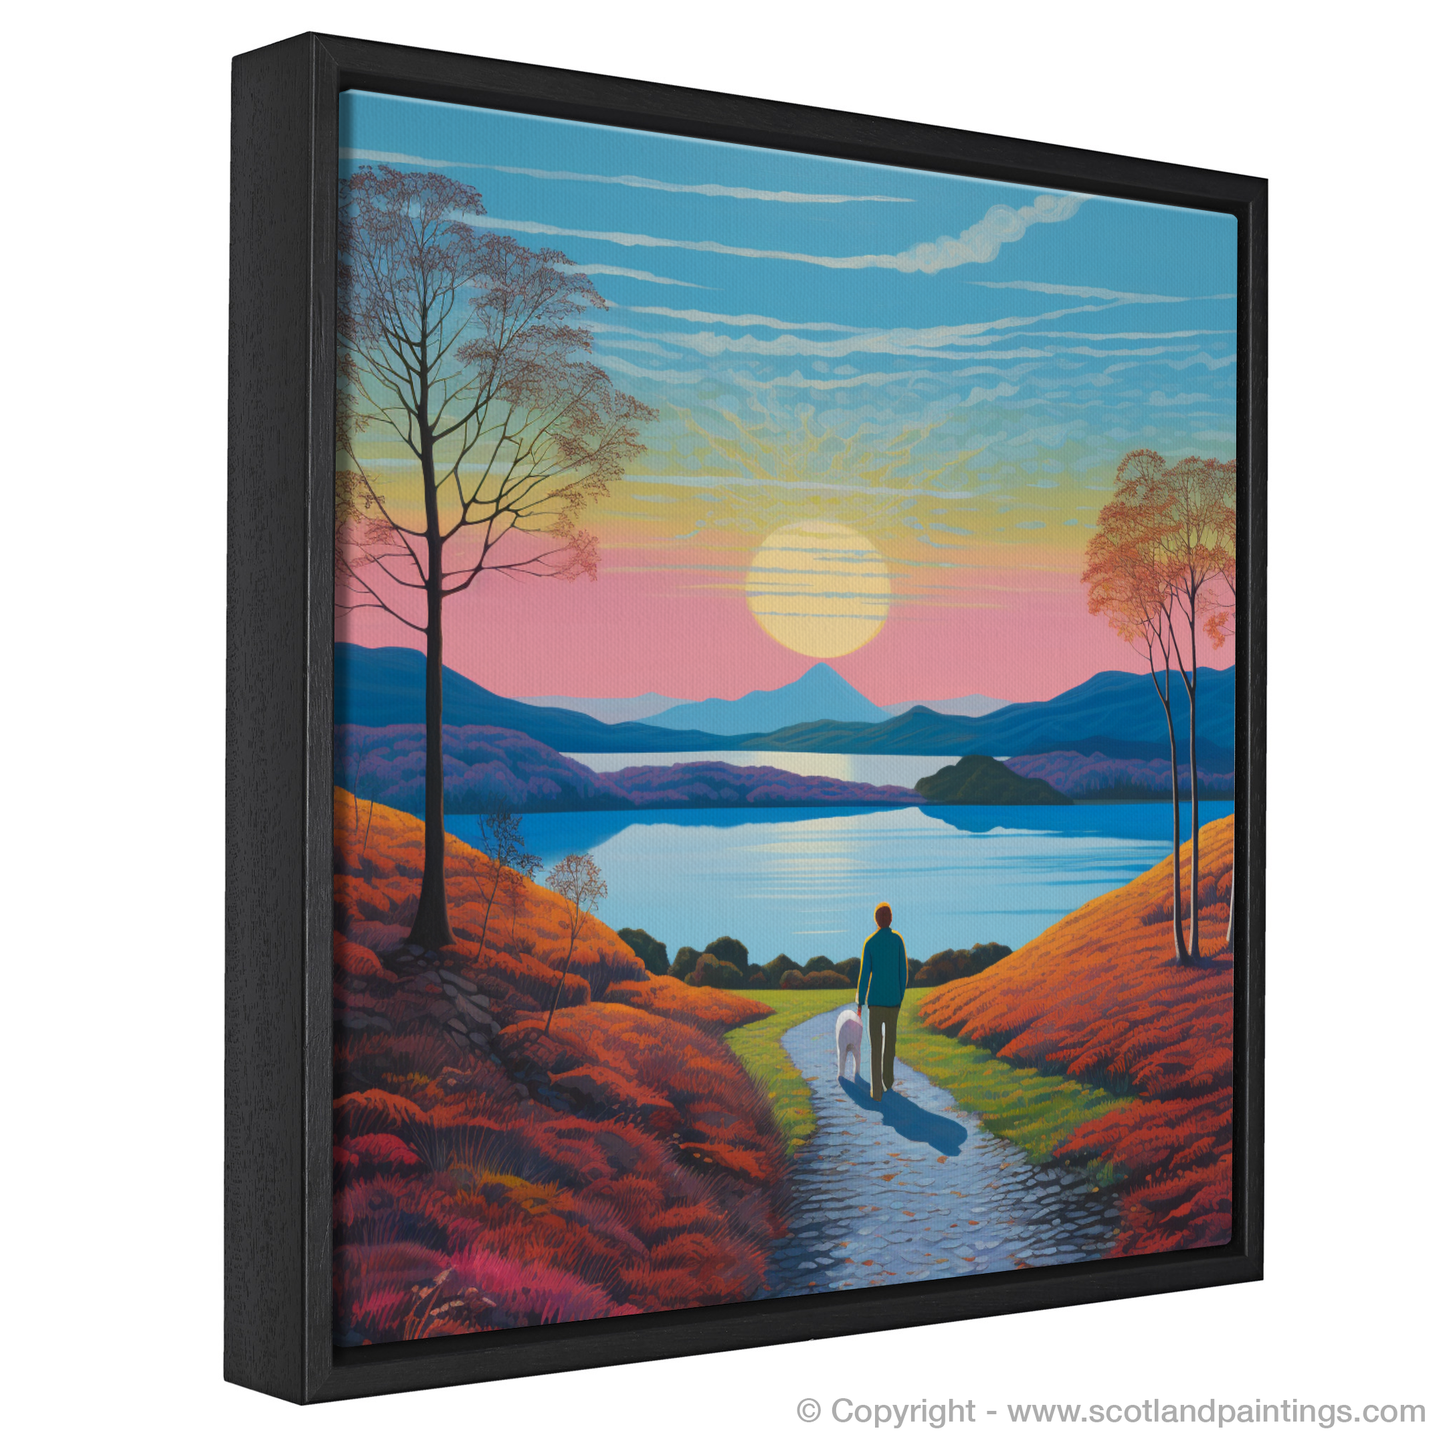 Painting and Art Print of A man walking dog at the side of Loch Lomond entitled "Walking the Twilight Path at Loch Lomond".